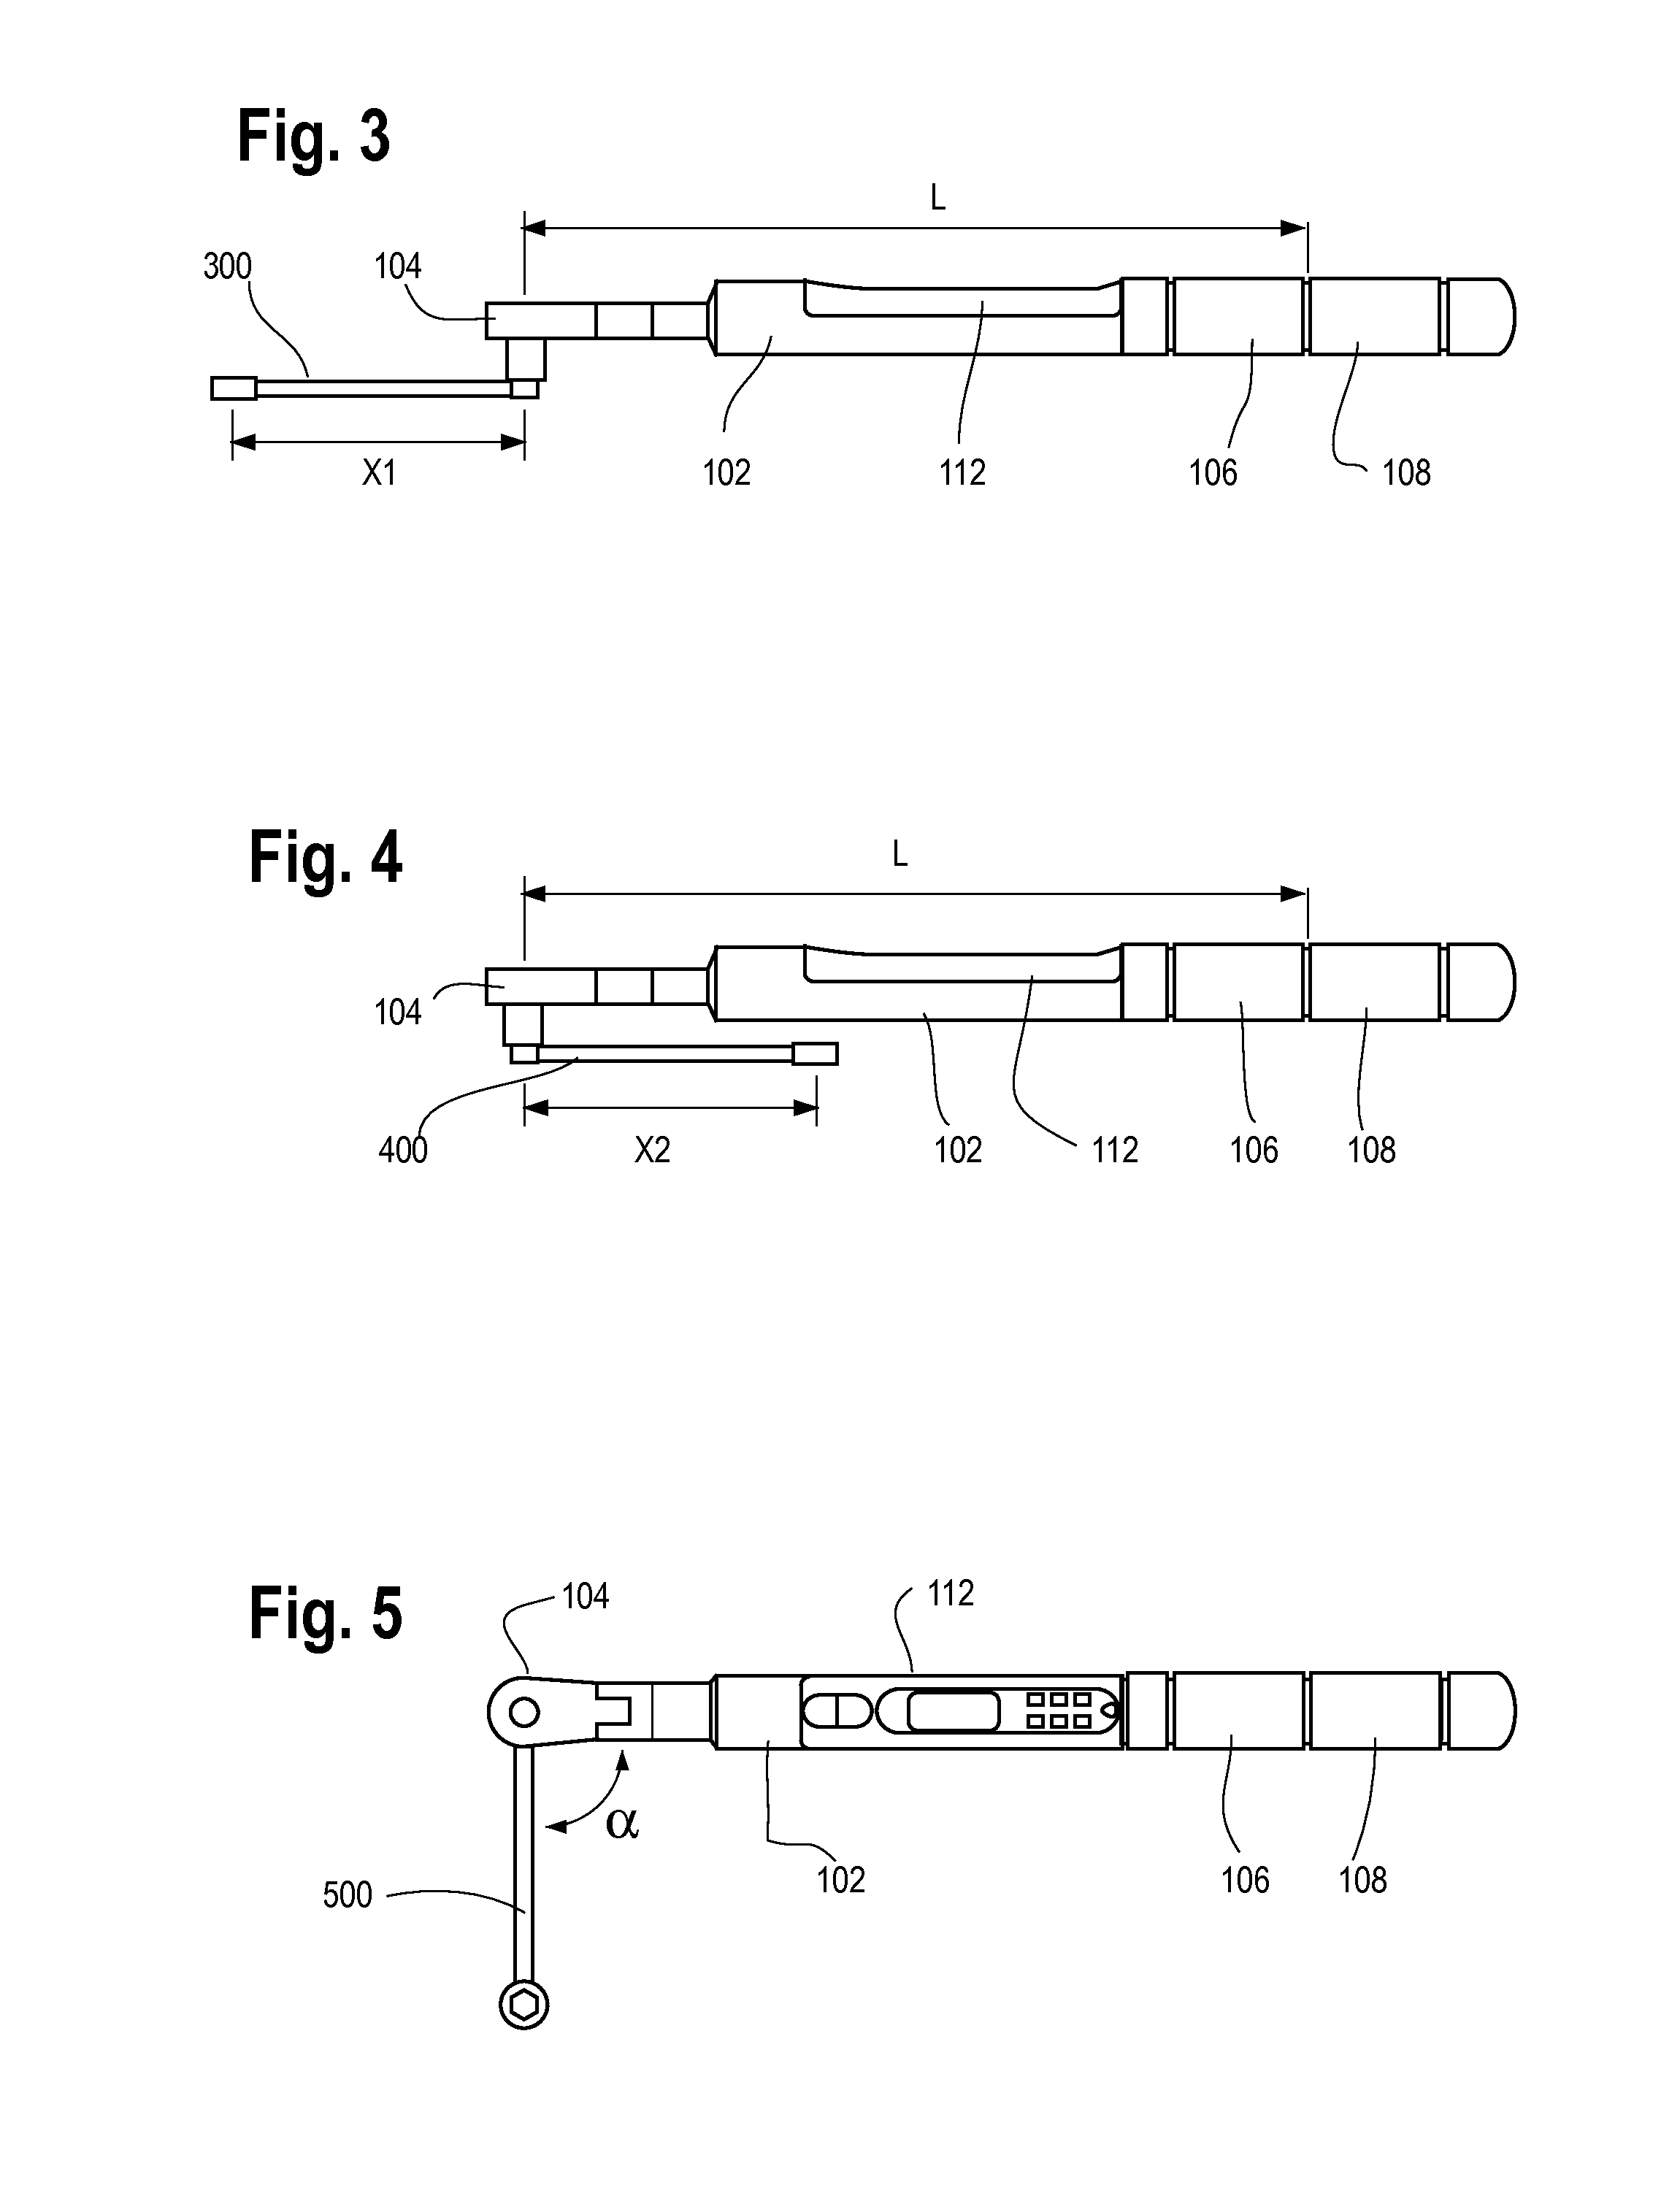 Method of Compensating for Adapters or Extensions on an Electronic Torque Wrench